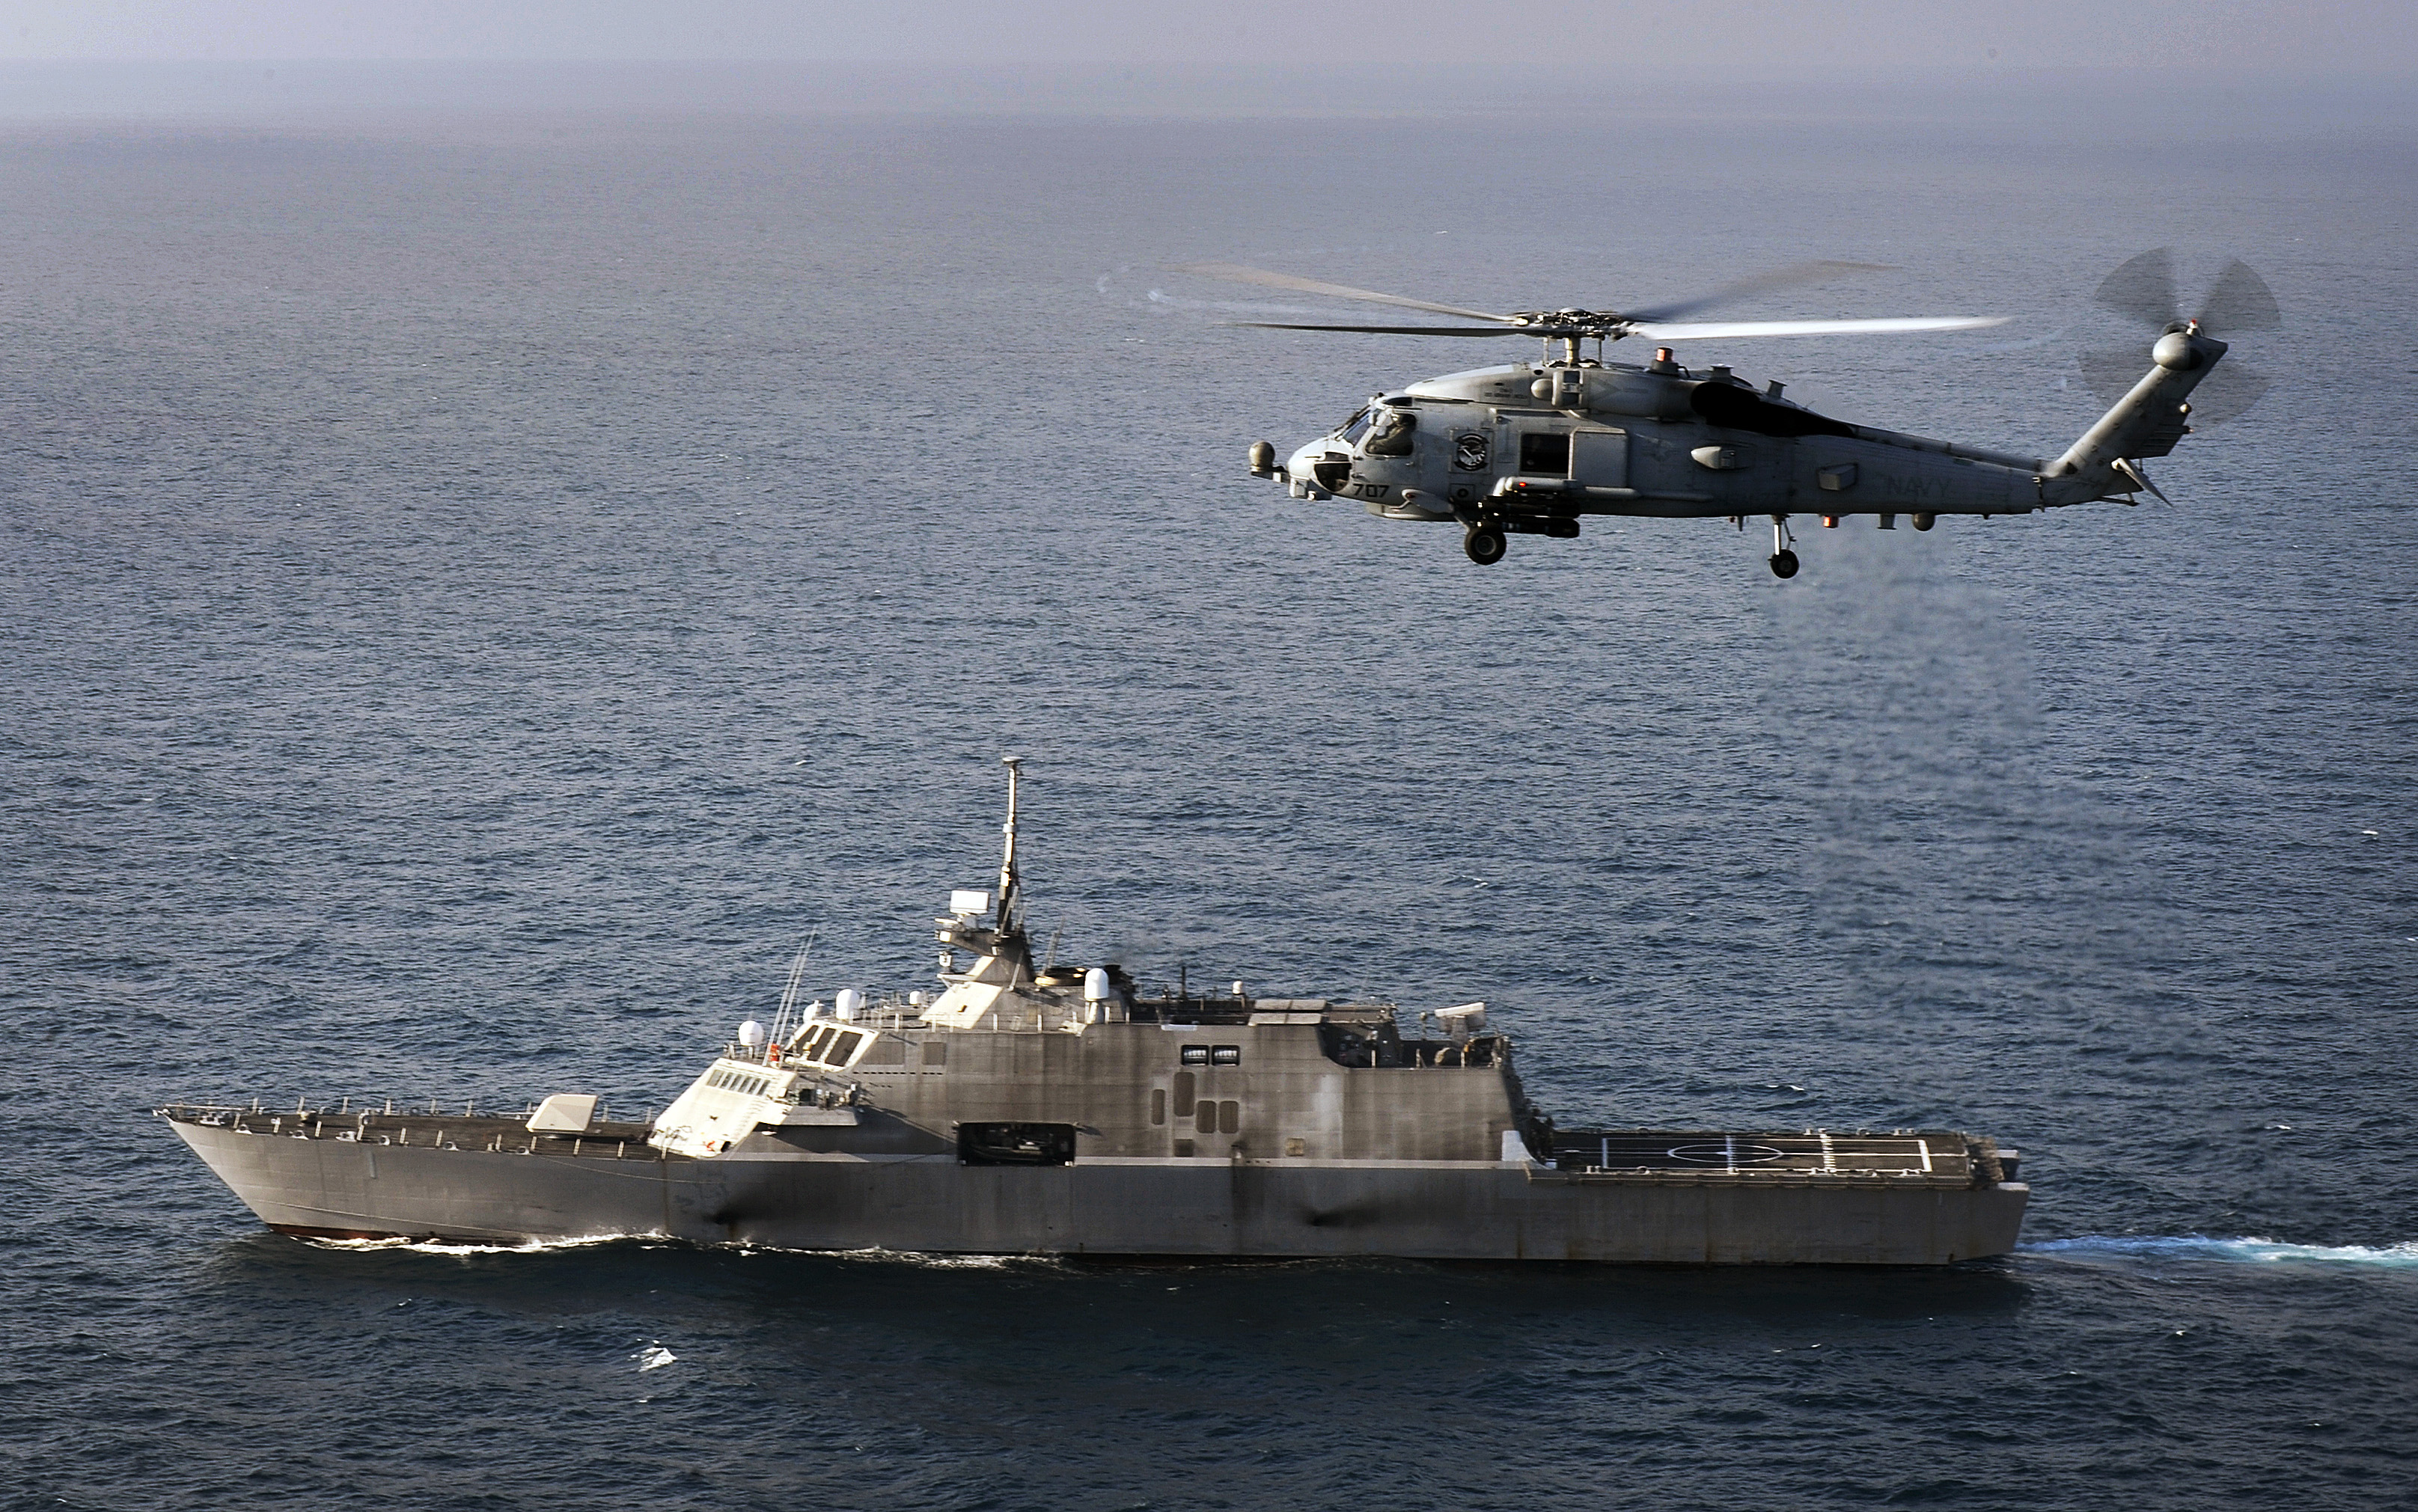 US_Navy_110607-N-DB113-207_An_MH-60R_Sea_Hawk_helicopter_assigned_to_Helicopter_Maritime_Strike_Squadron_%28HSM%29_77_flies_alongside_the_littoral_comb.jpg